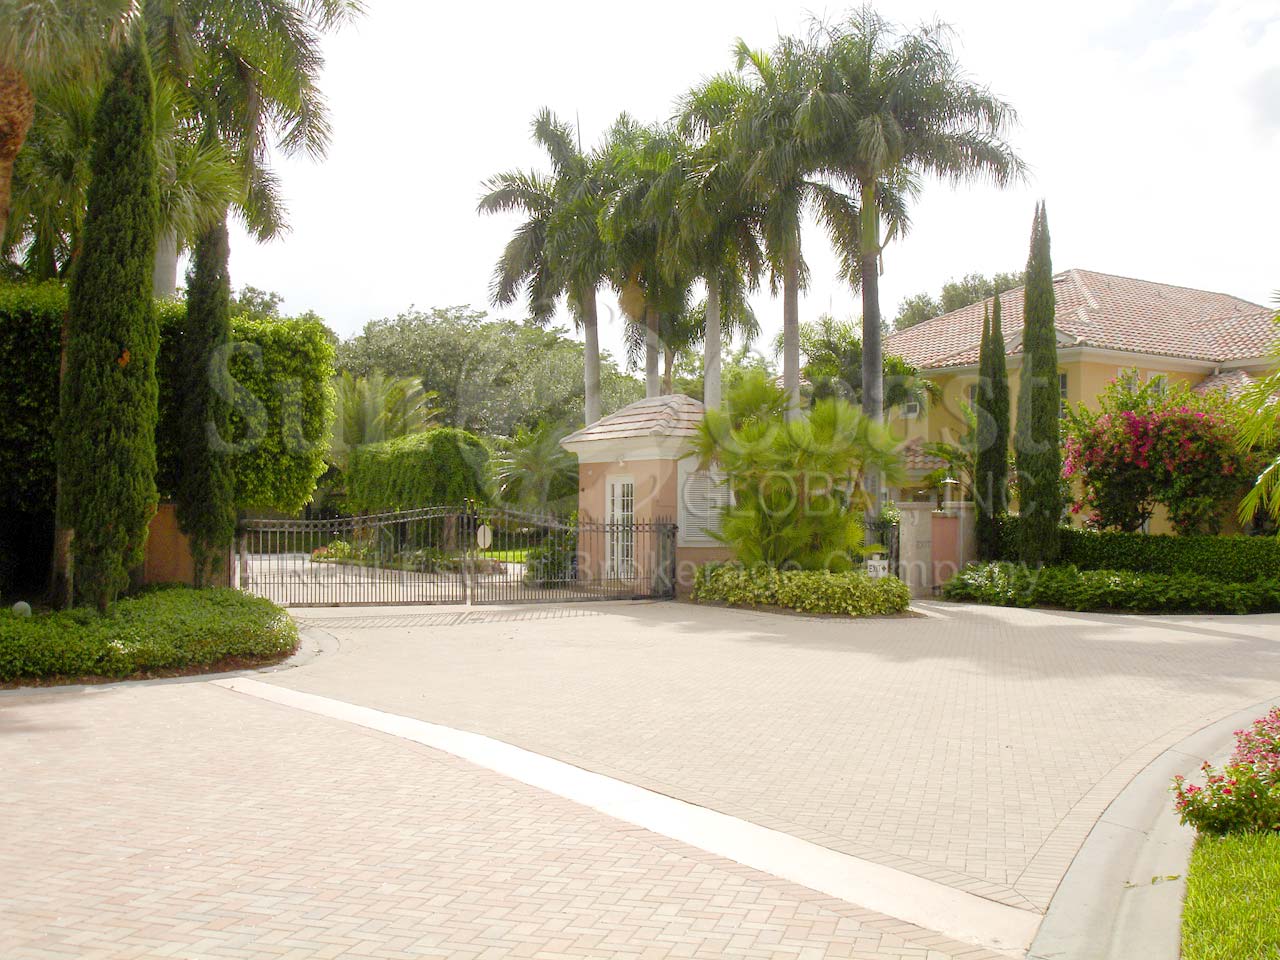 Pointe at Pelican Bay gated entry with coded key pad